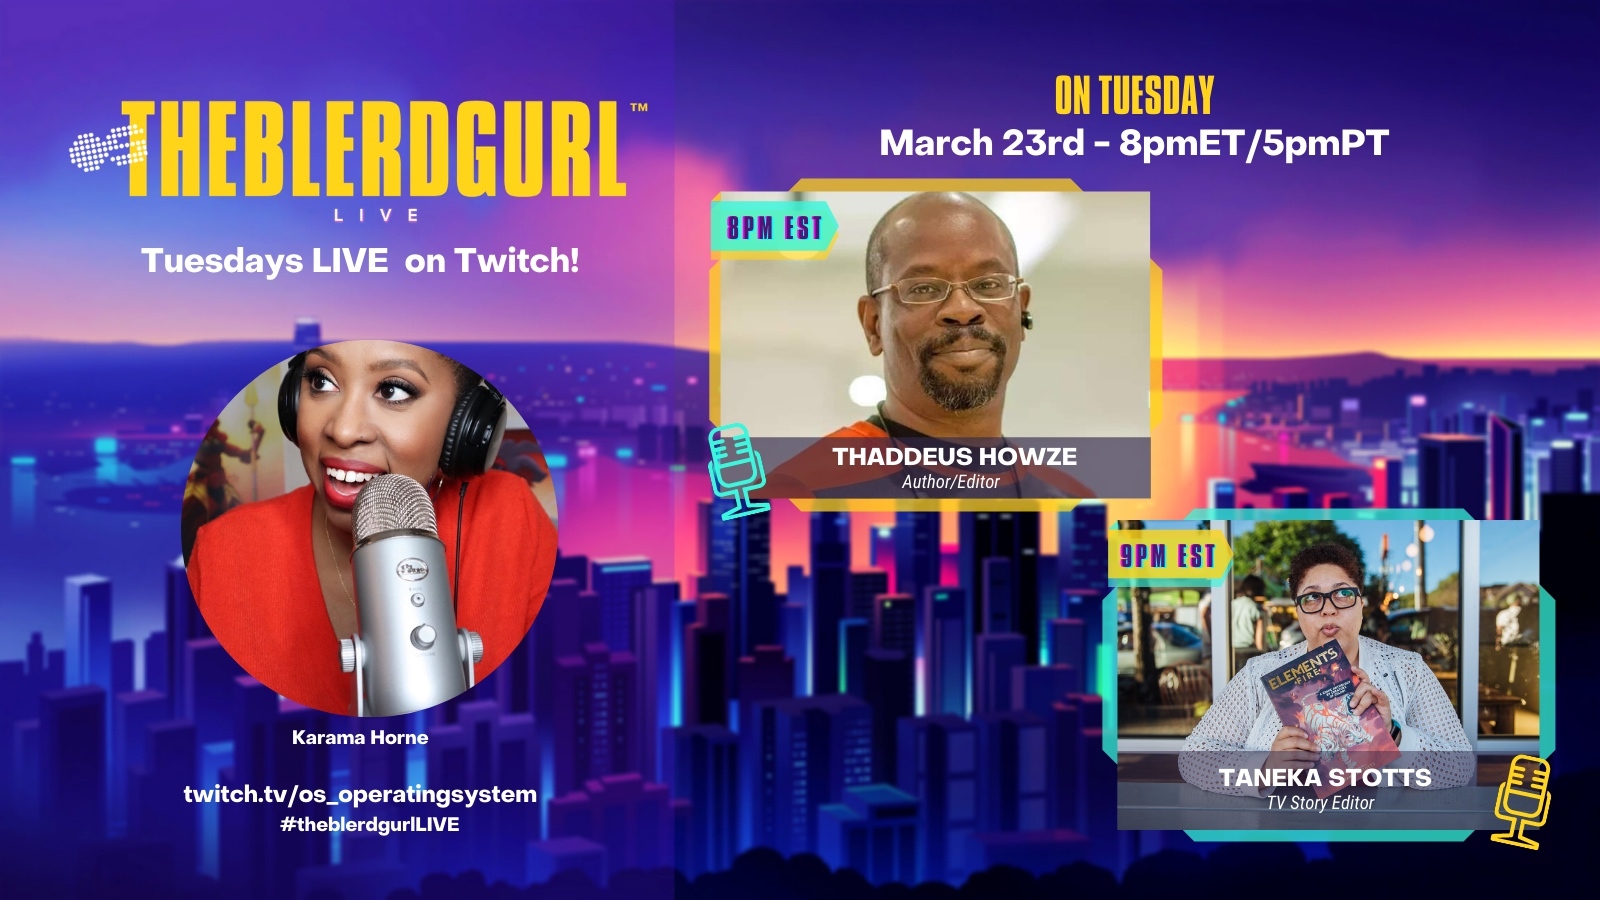 Thaddeus Howze Guests on ‘The Blerdgurl’, with Host Karama Horne